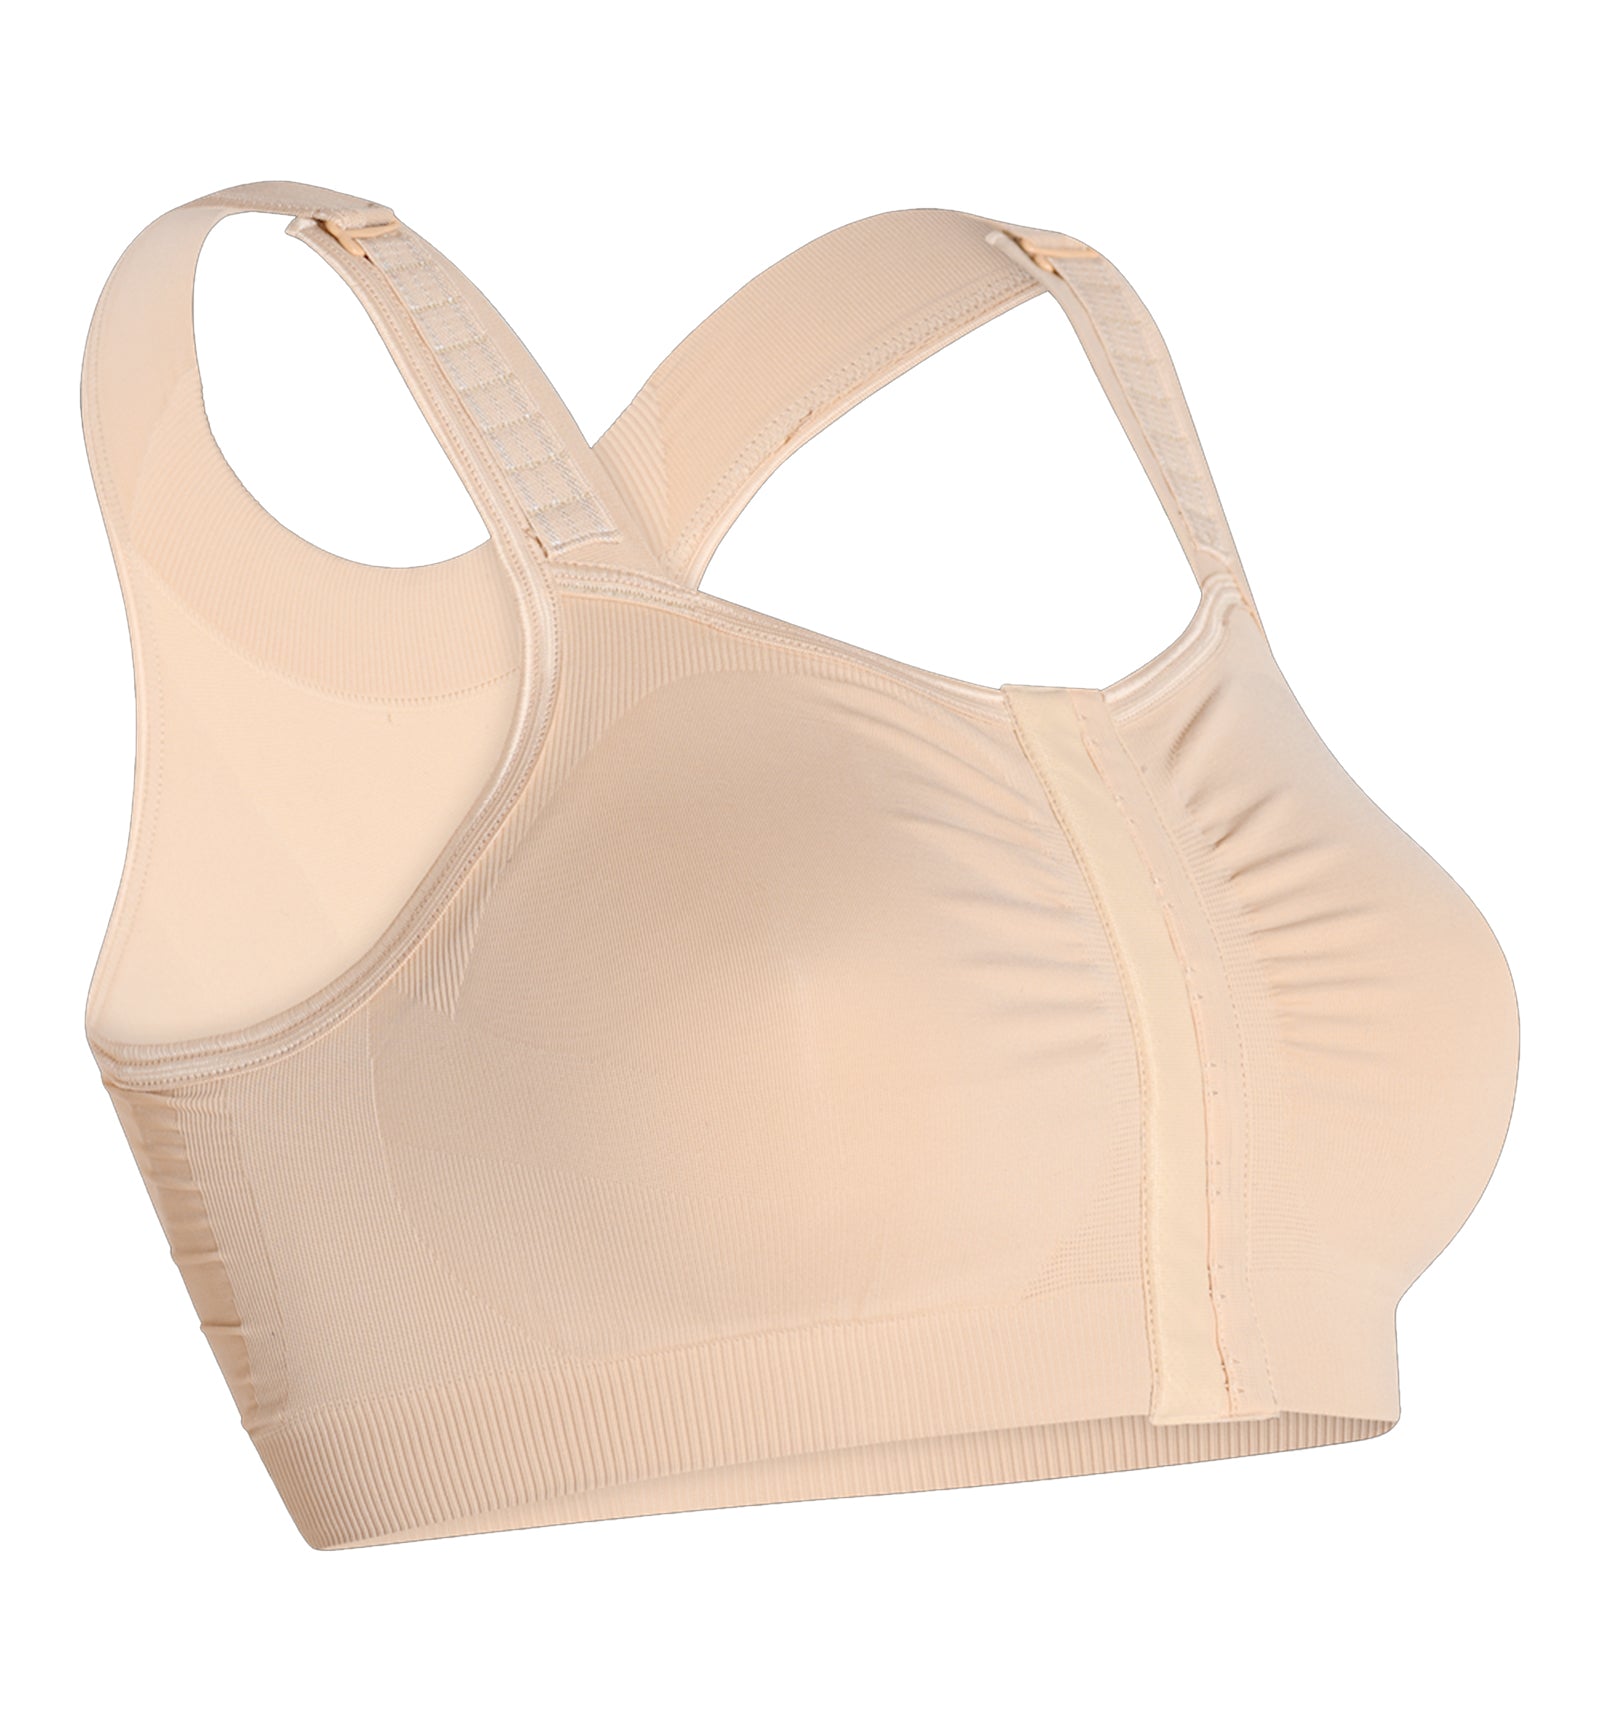 Carefix Mary Front Close Post-Op Bra (3343),Small,Nude - Tan,Small